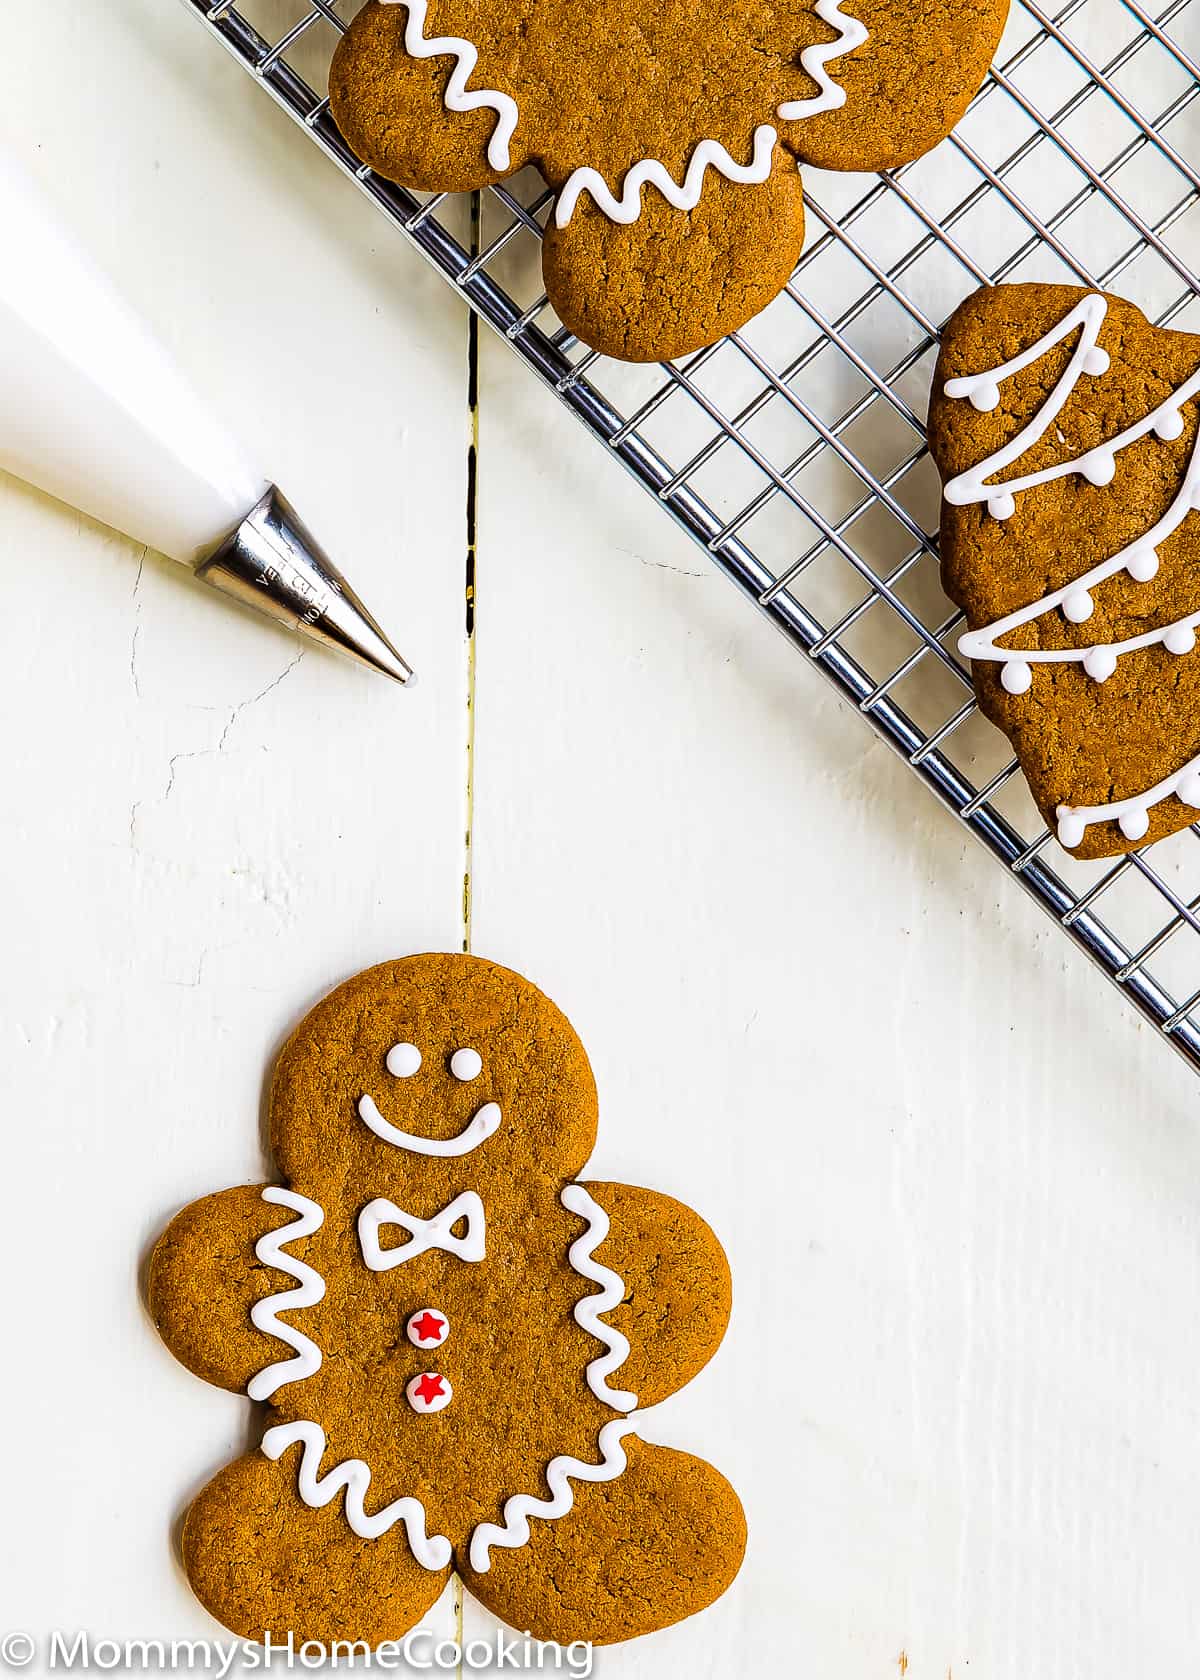 Eggless Gingerbread man Cookie over a wooden surface with a piping bag with eggless royal icing in it